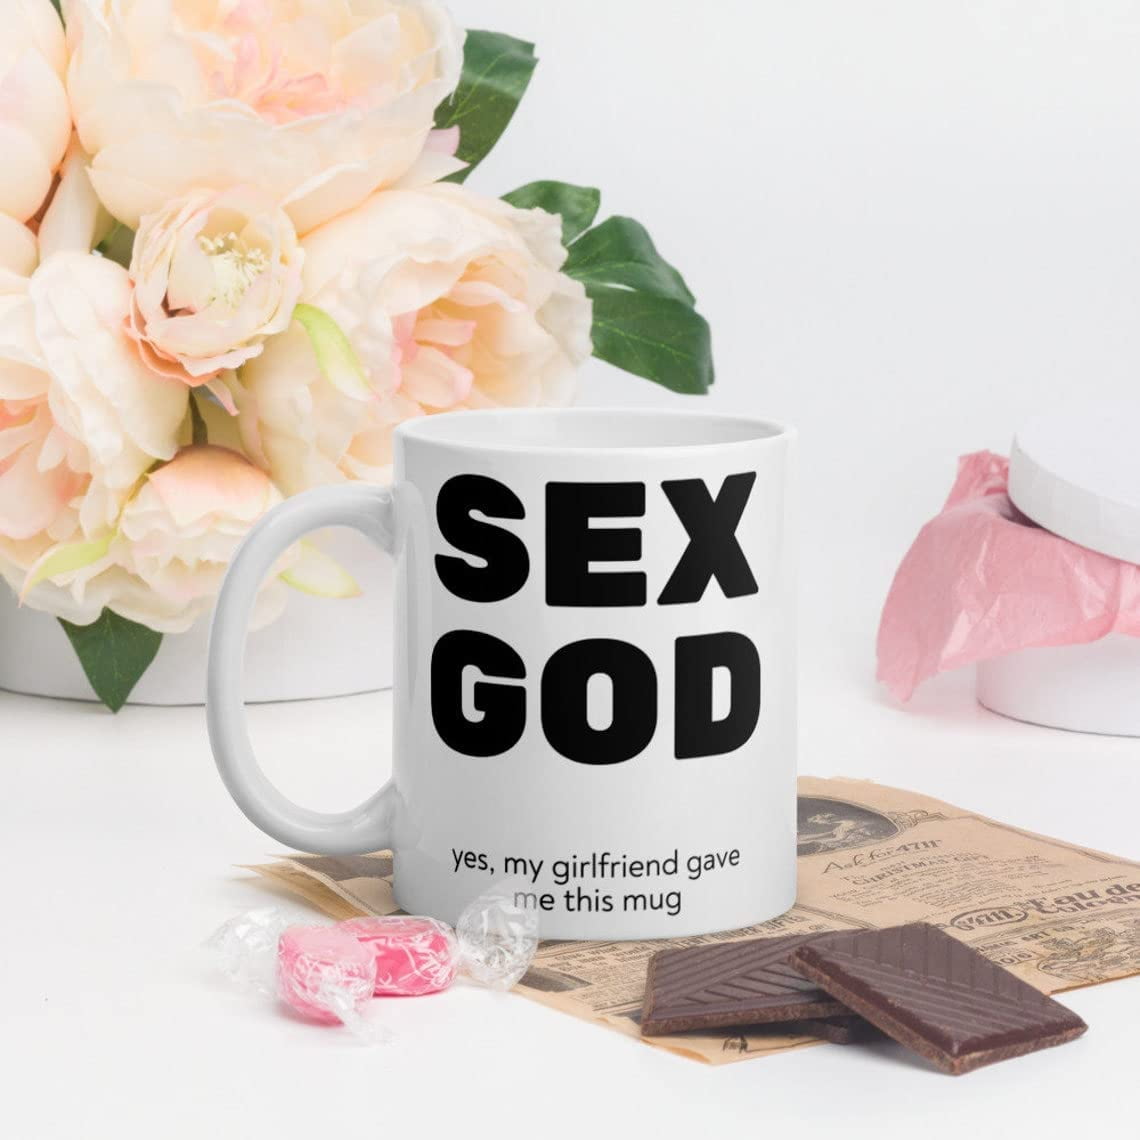 Sex God Gave Me This Mug Anniversary Romantic Gifts Funny Quote Mug Sarcastic Birthday Gag Gift For Men Couple Mugs Cute Wedding Anniversary Present Coffee Mug Gifts for Wife picture picture